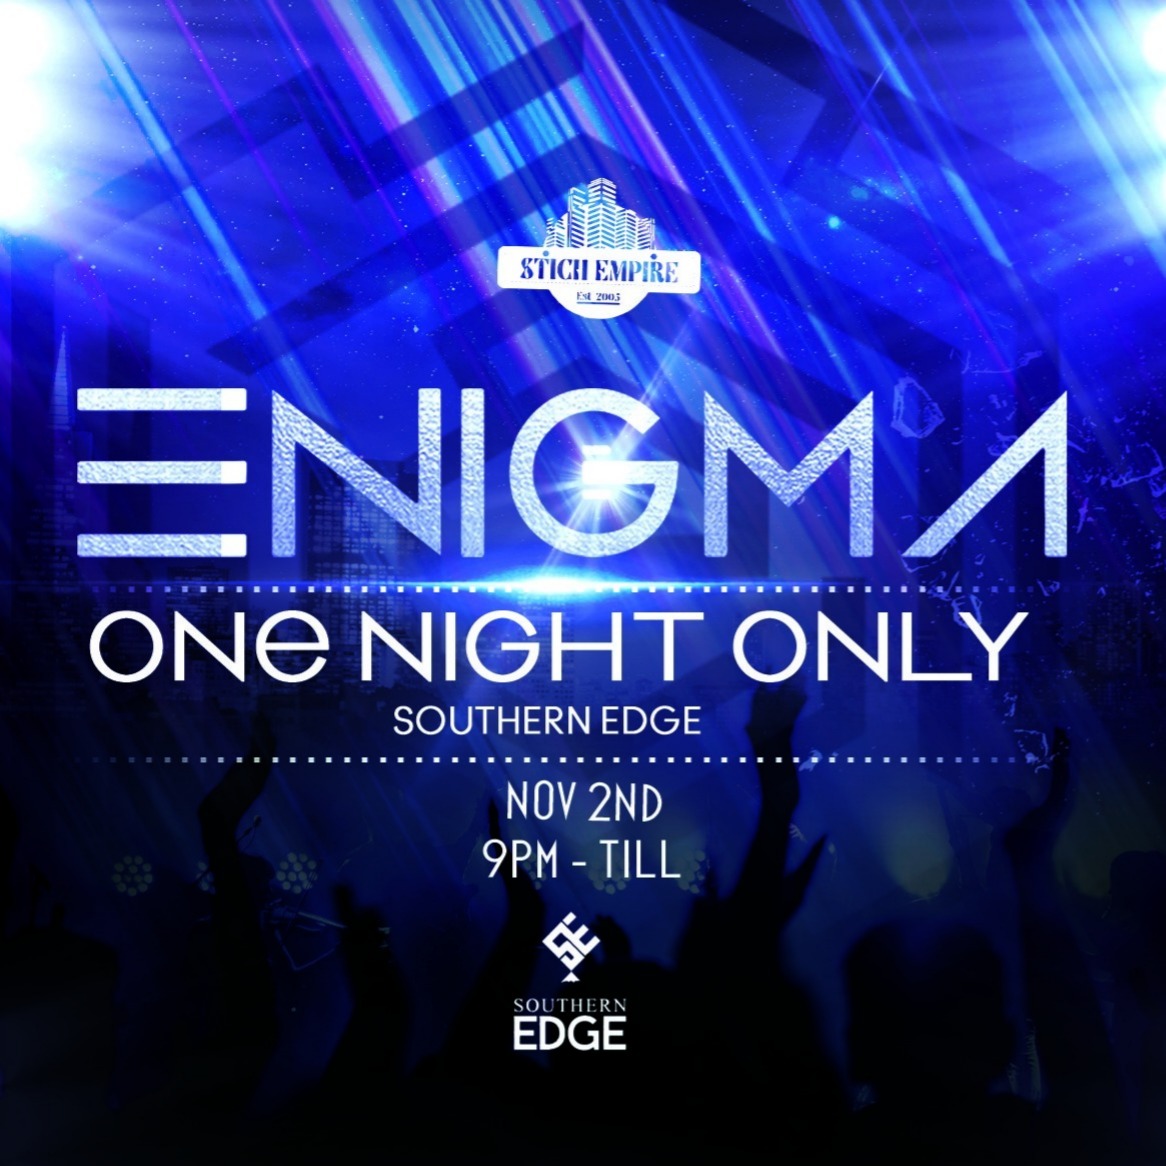 ENIGMA ONE NIGHT ONLY